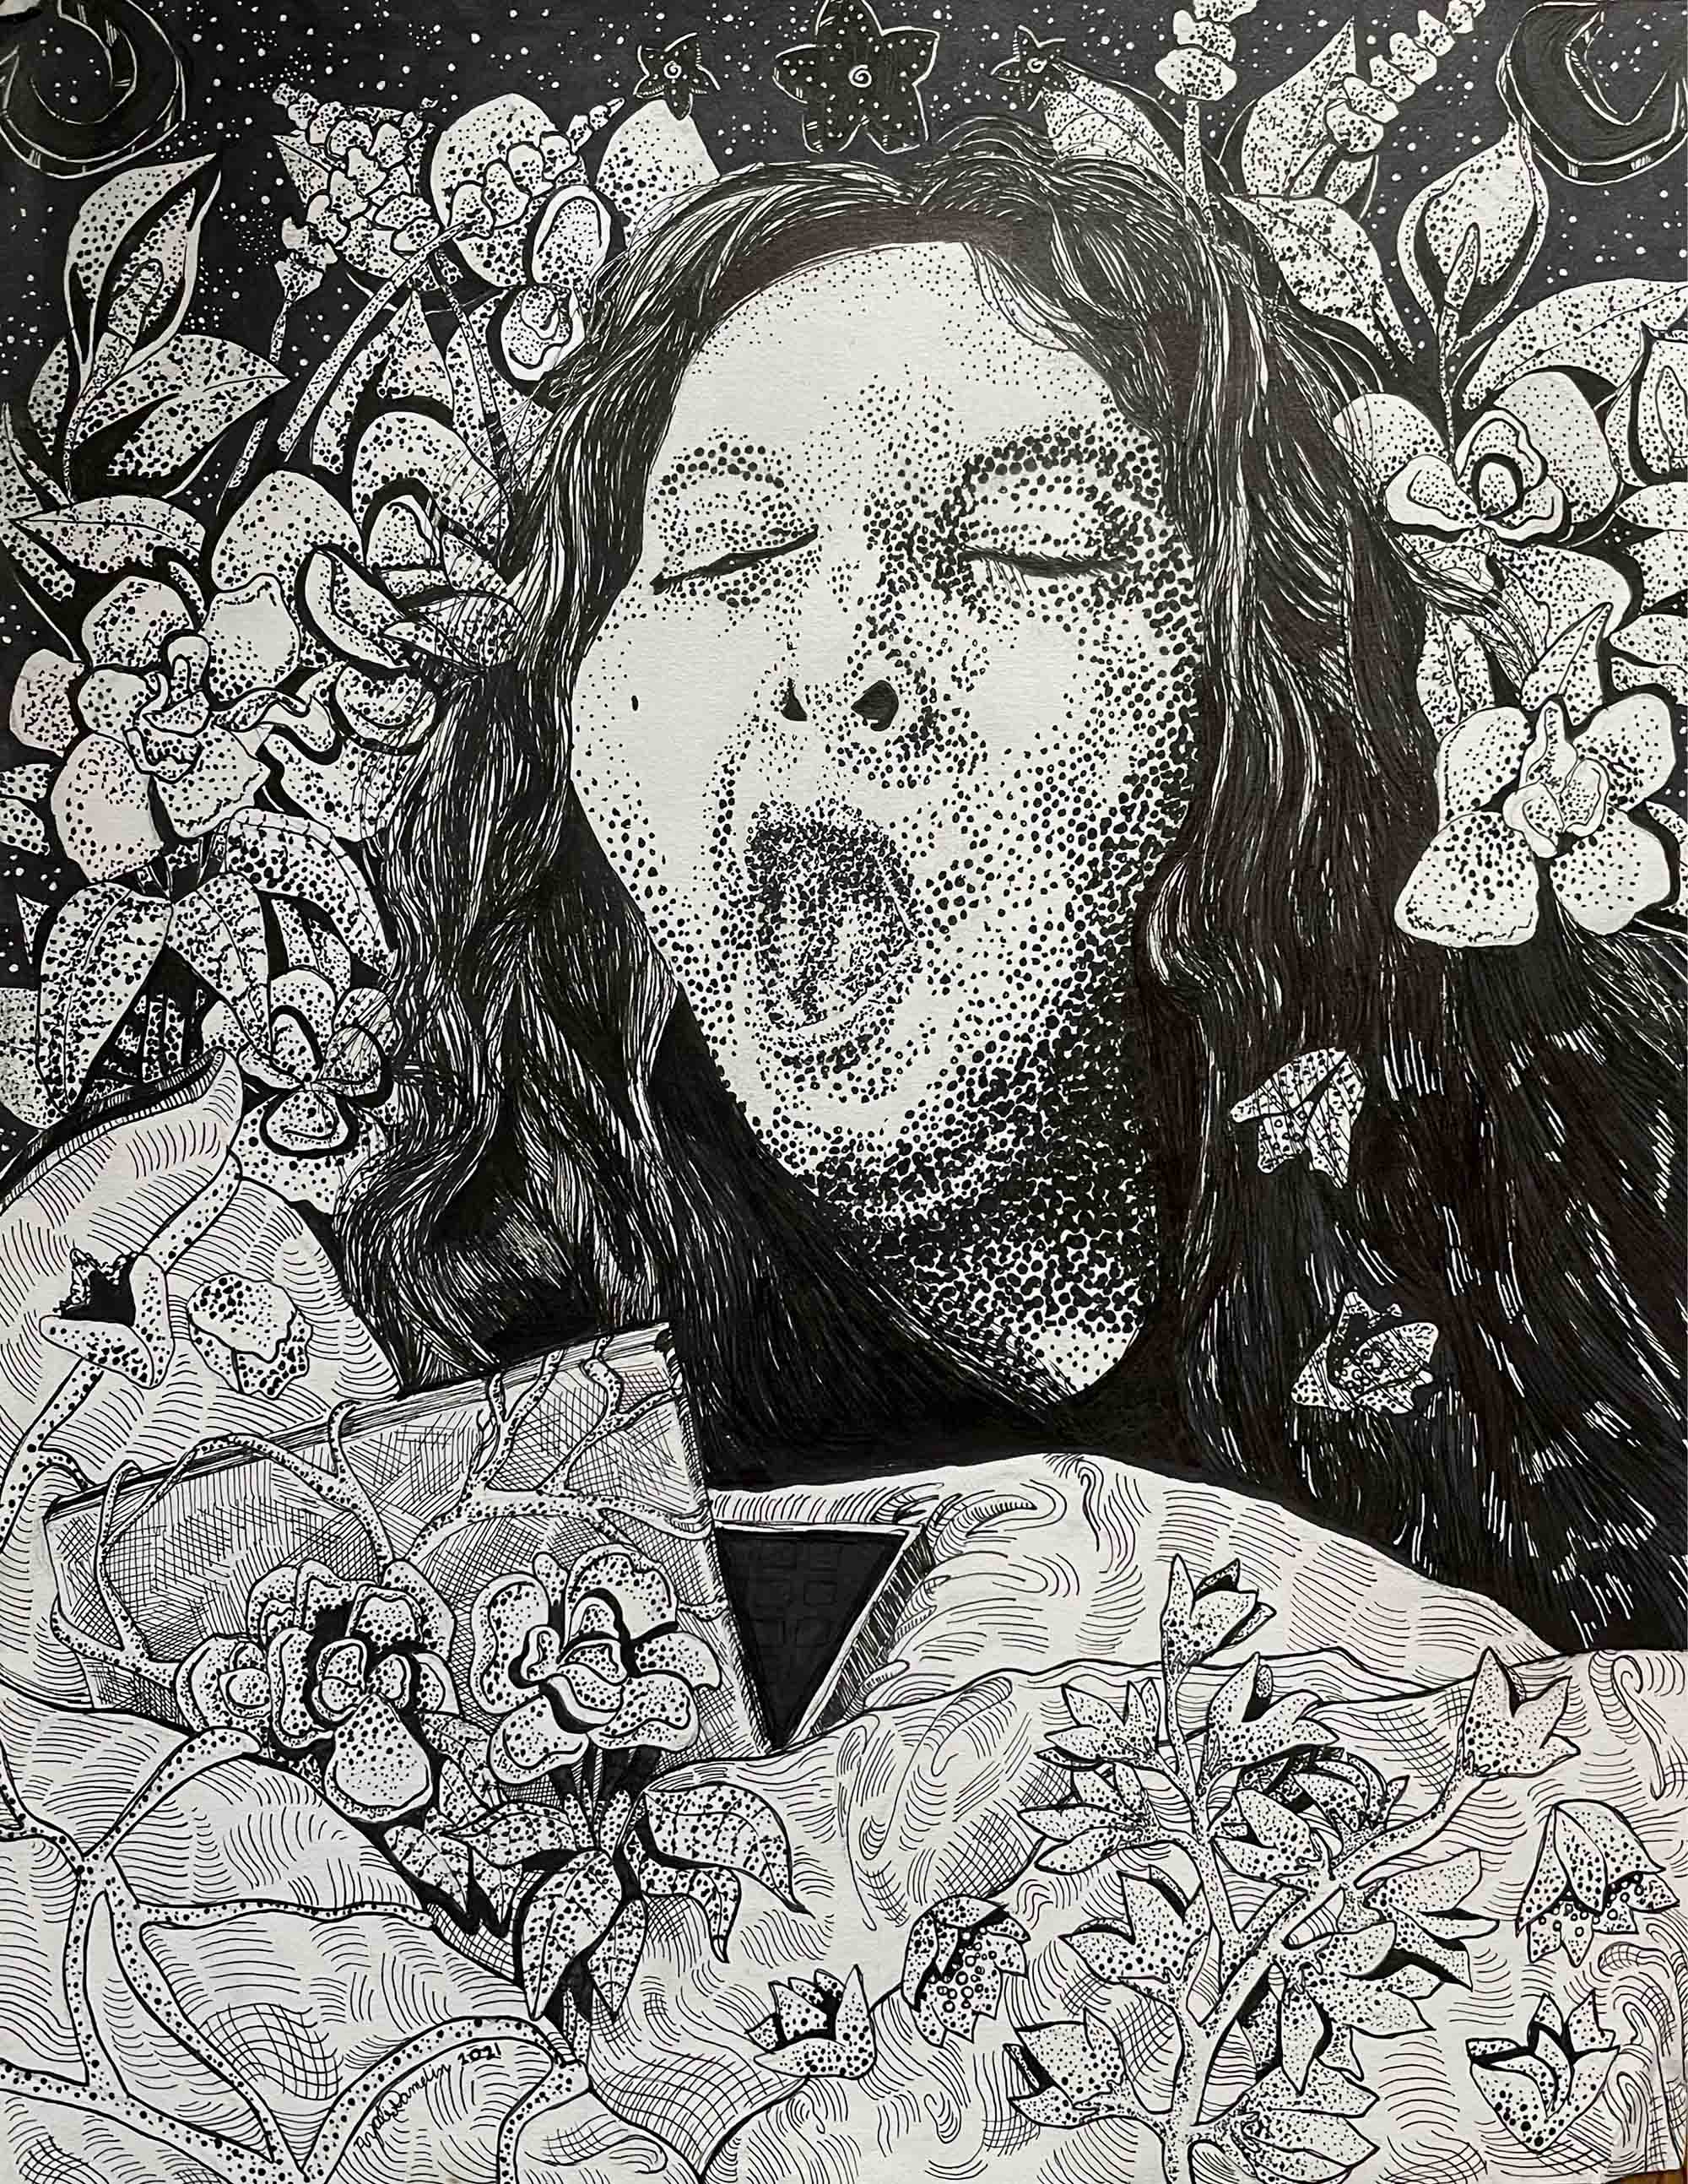 A drawing of a girl yawning